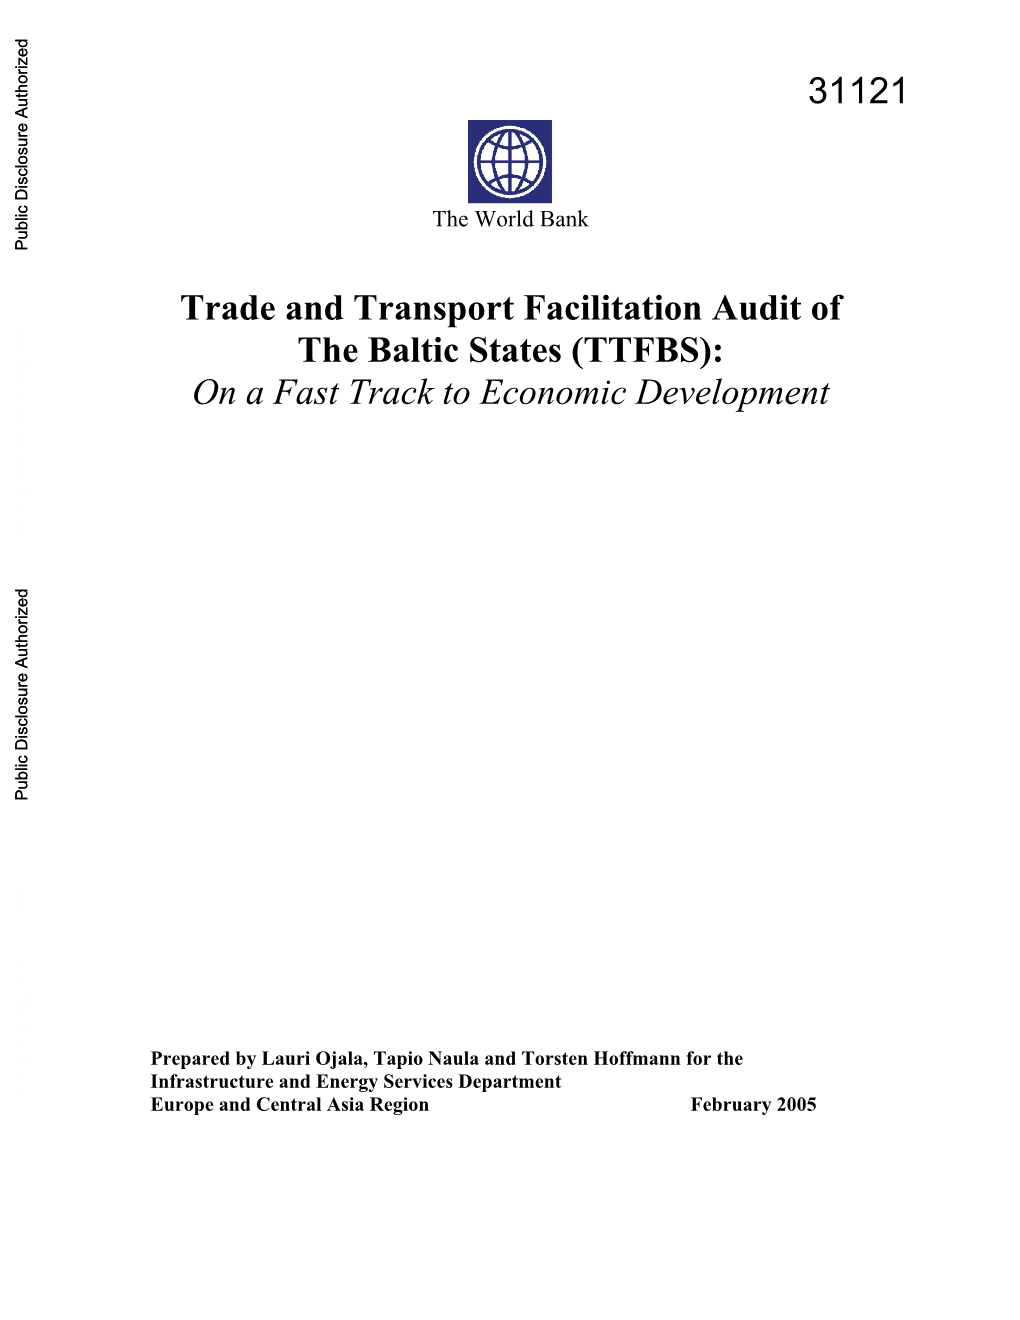 Trade and Transport Facilitation Audit of the Baltic States (TTFBS): on a Fast Track to Economic Development